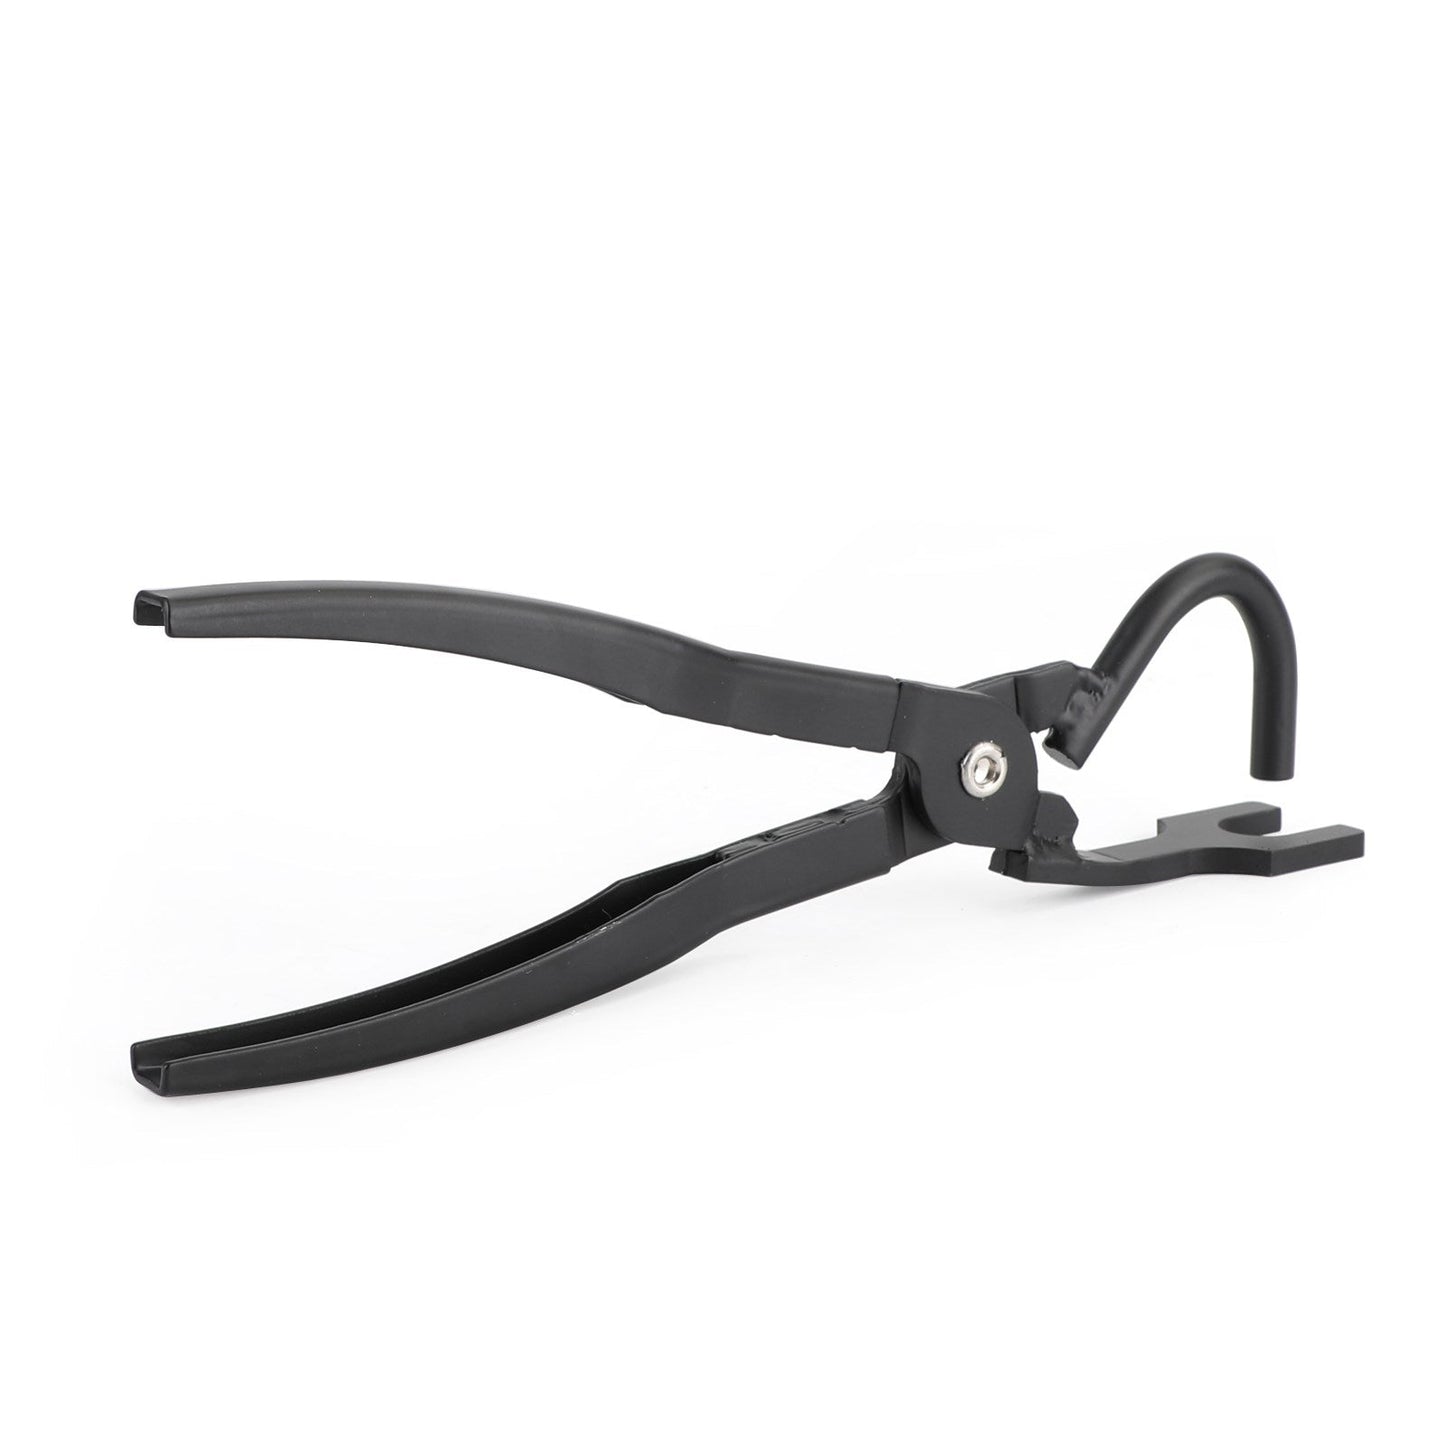 38350 Exhaust Hanger Removal Pliers Clamps for Automotive Tool Black